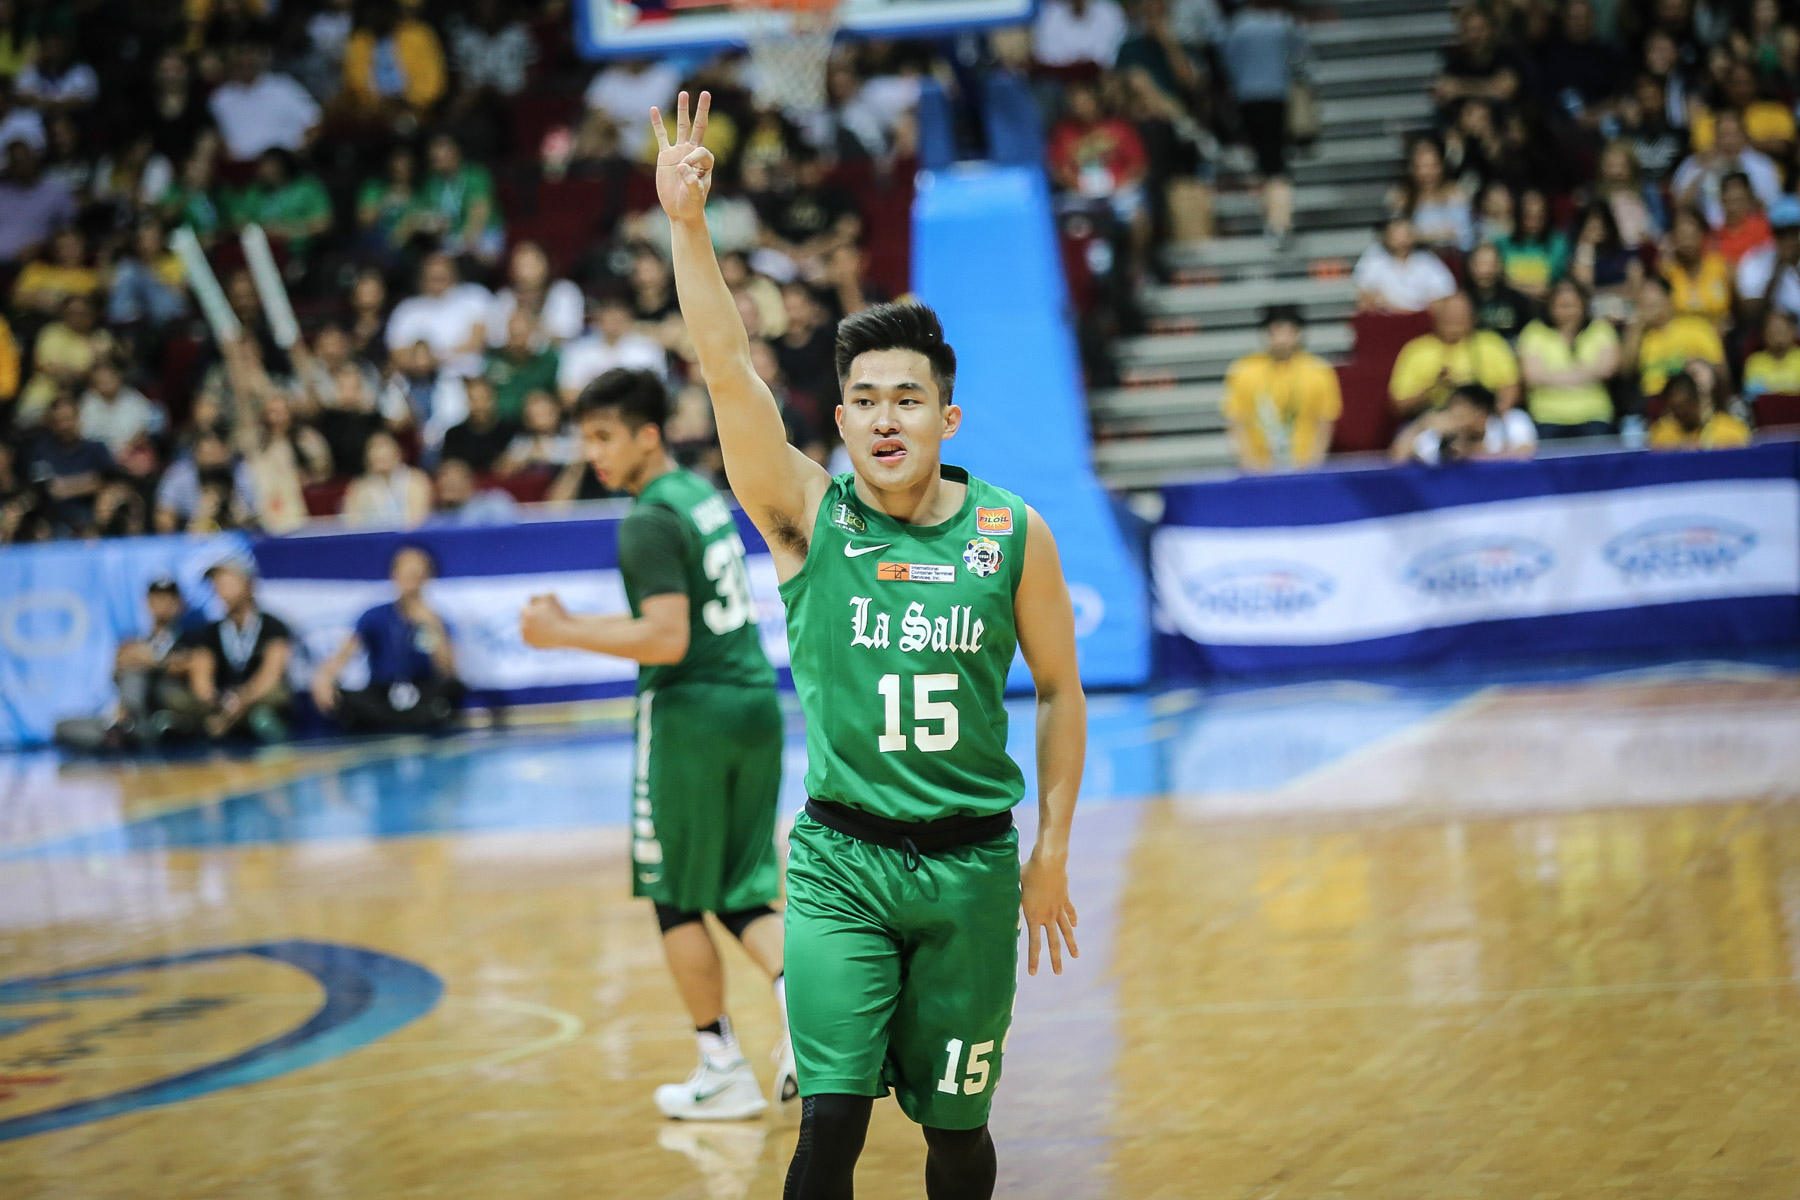 Heart of a champ: Montalbo recovers from hospitalization to lead La Salle